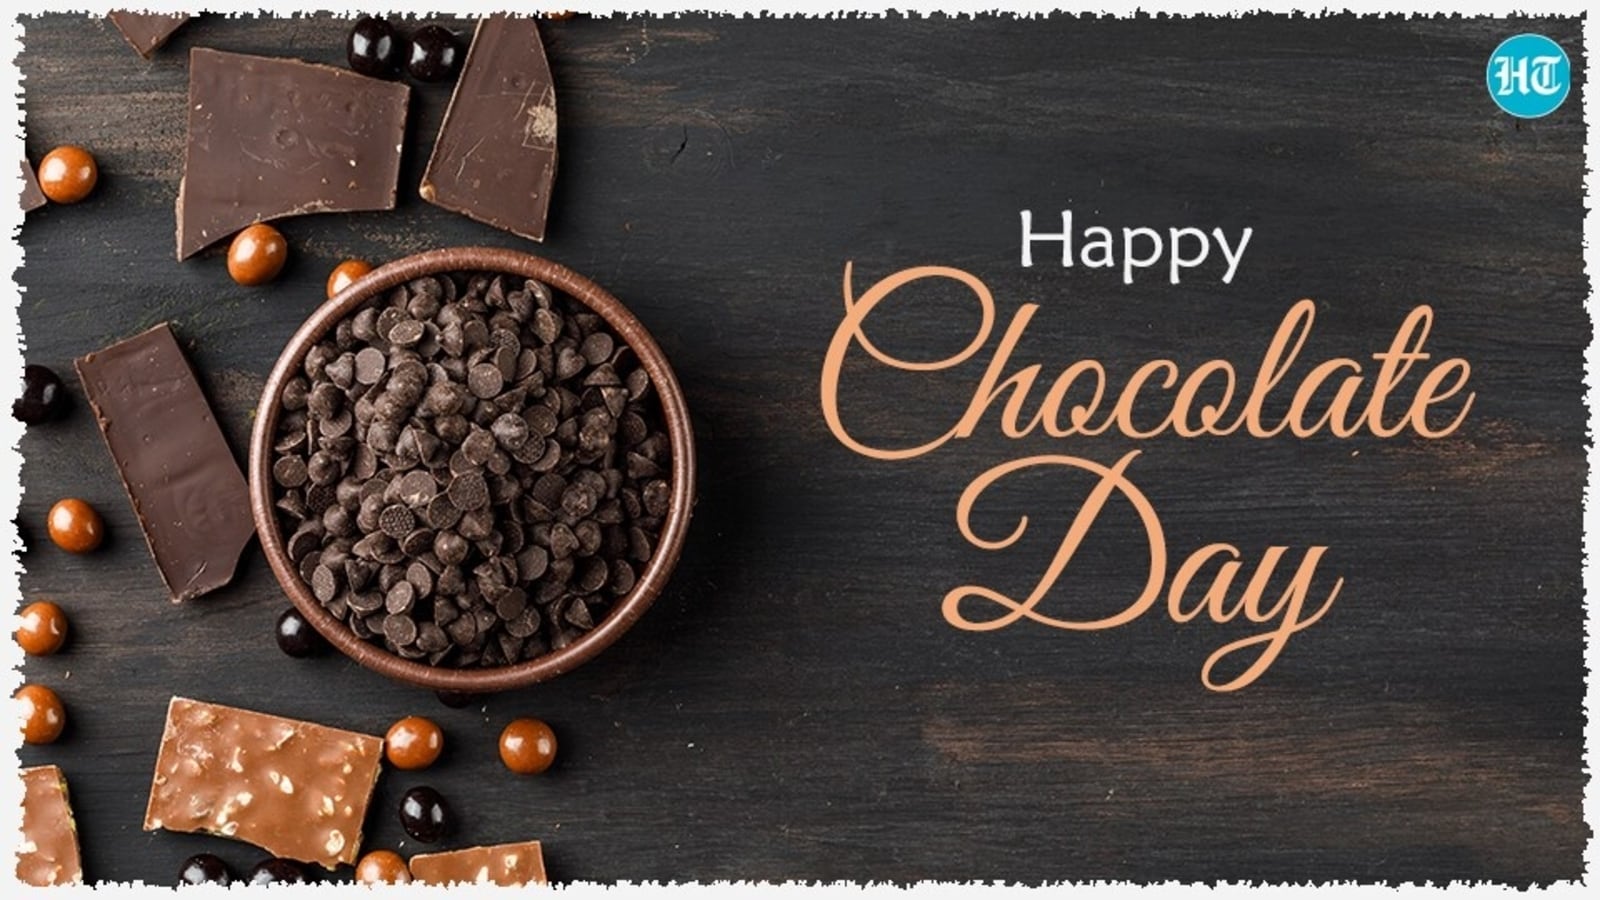 Happy Chocolate Day 2022: Wishes, quotes and images to send to your beloved  - Hindustan Times